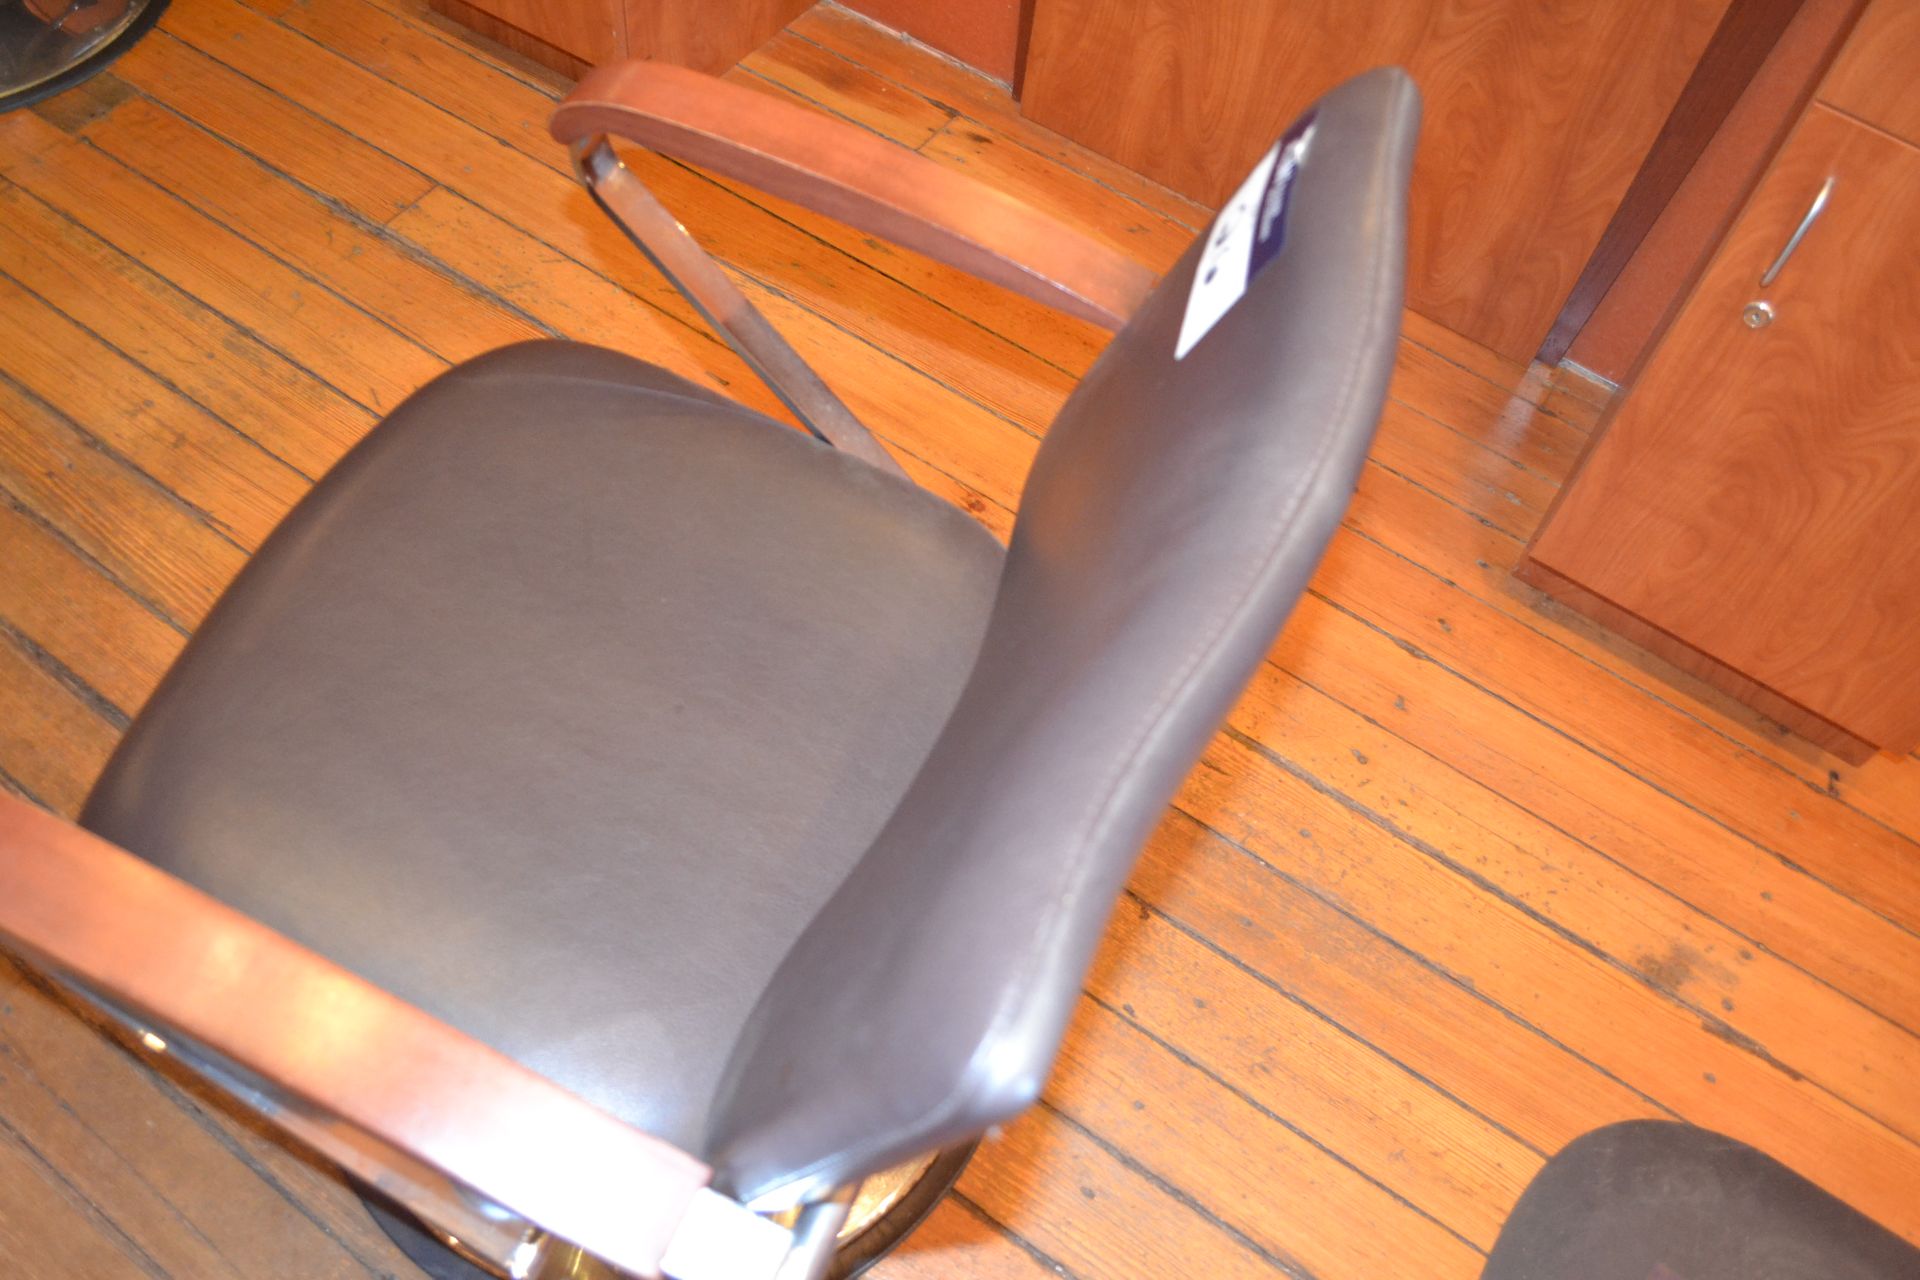 Formatron Wave, Hydraulic Styling Chair - Image 5 of 5